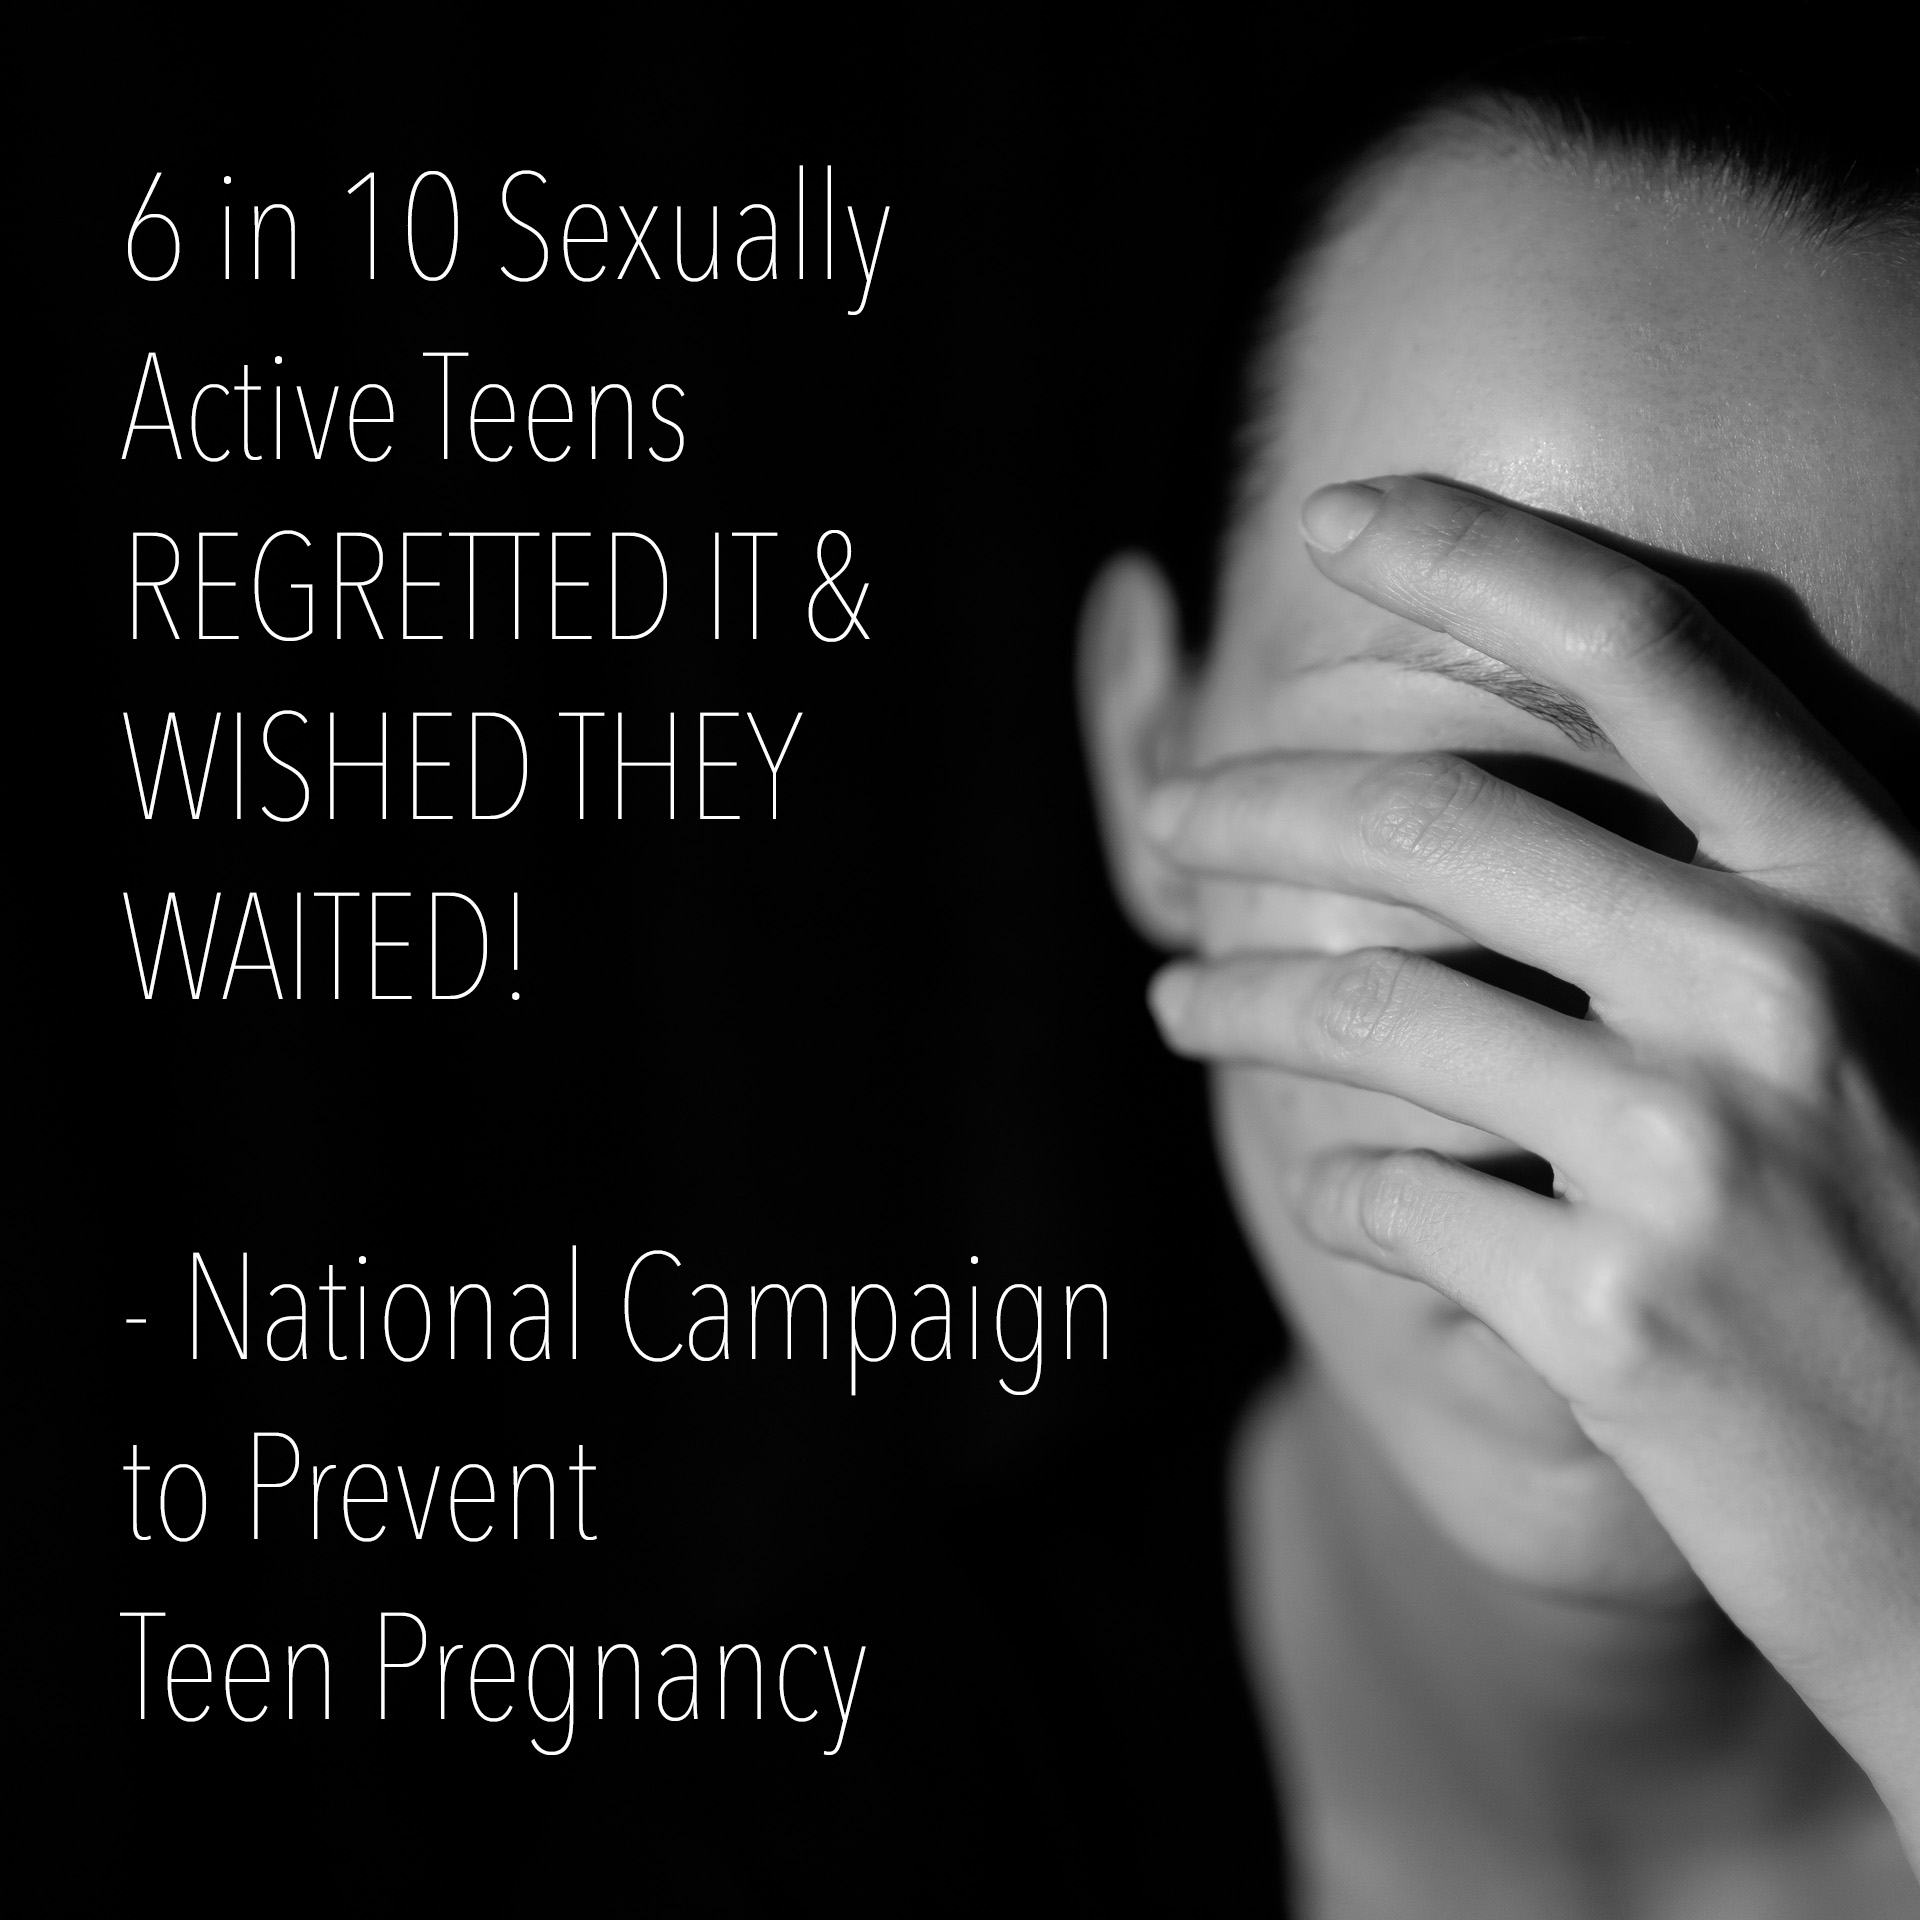 6 in 10 Sexually Active Teens REGRETTED IT & WISHED THEY WAITED! - National Campaign to Prevent Teen Pregnancy